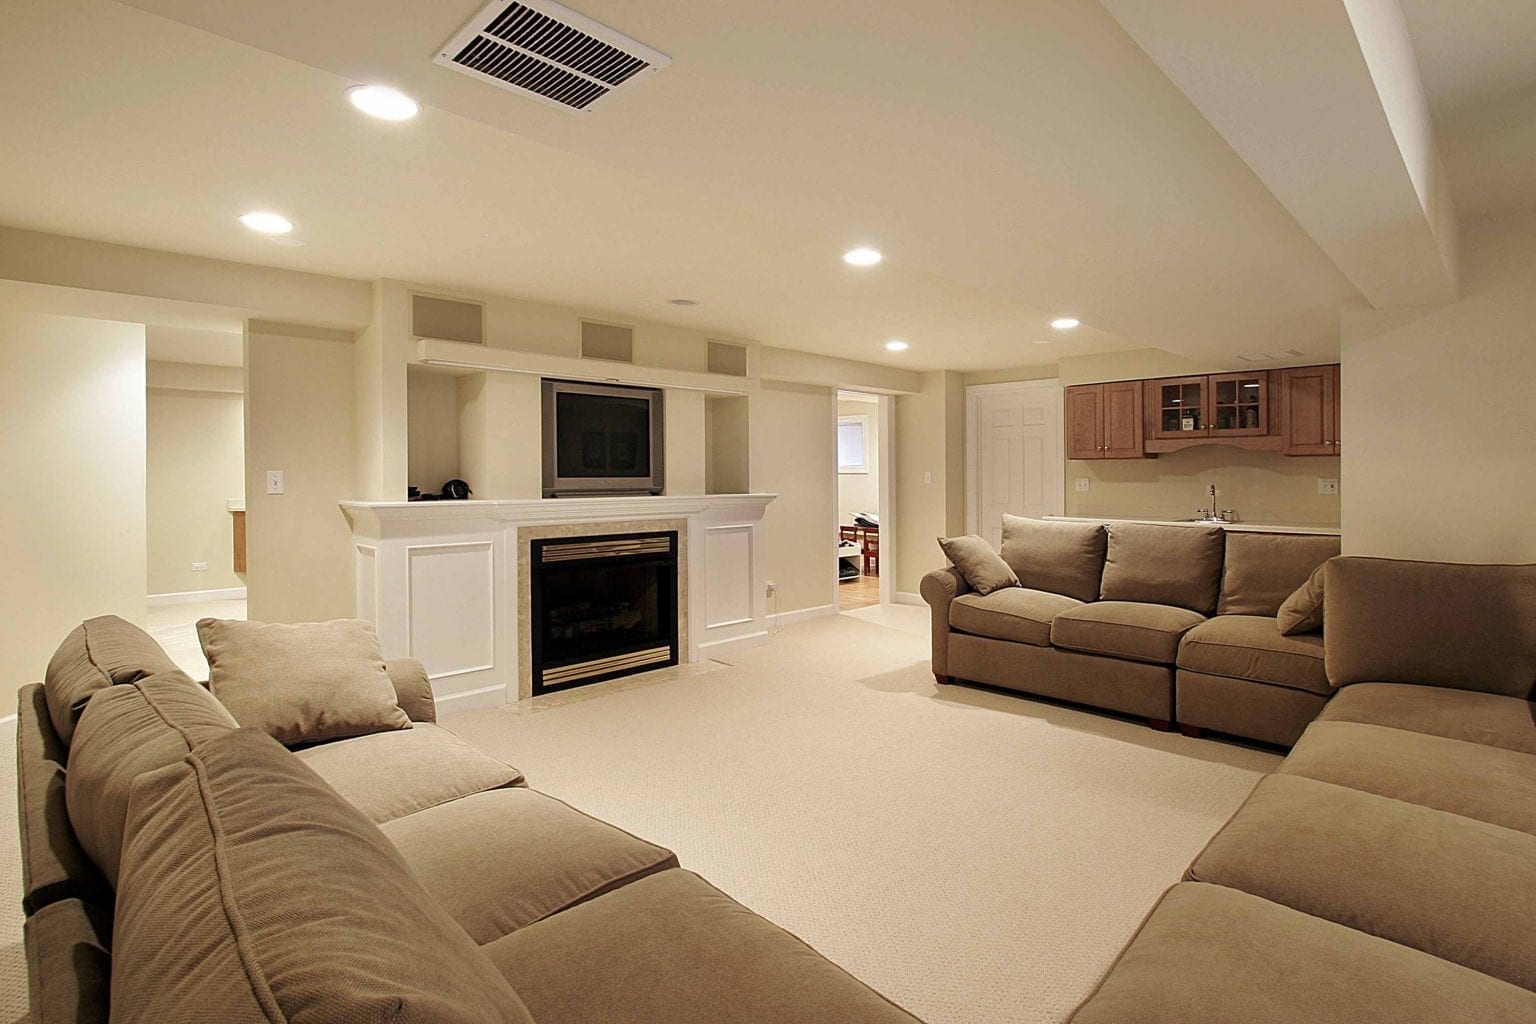 Decorating A Basement Family Room: Creating A Cozy And Inviting Space